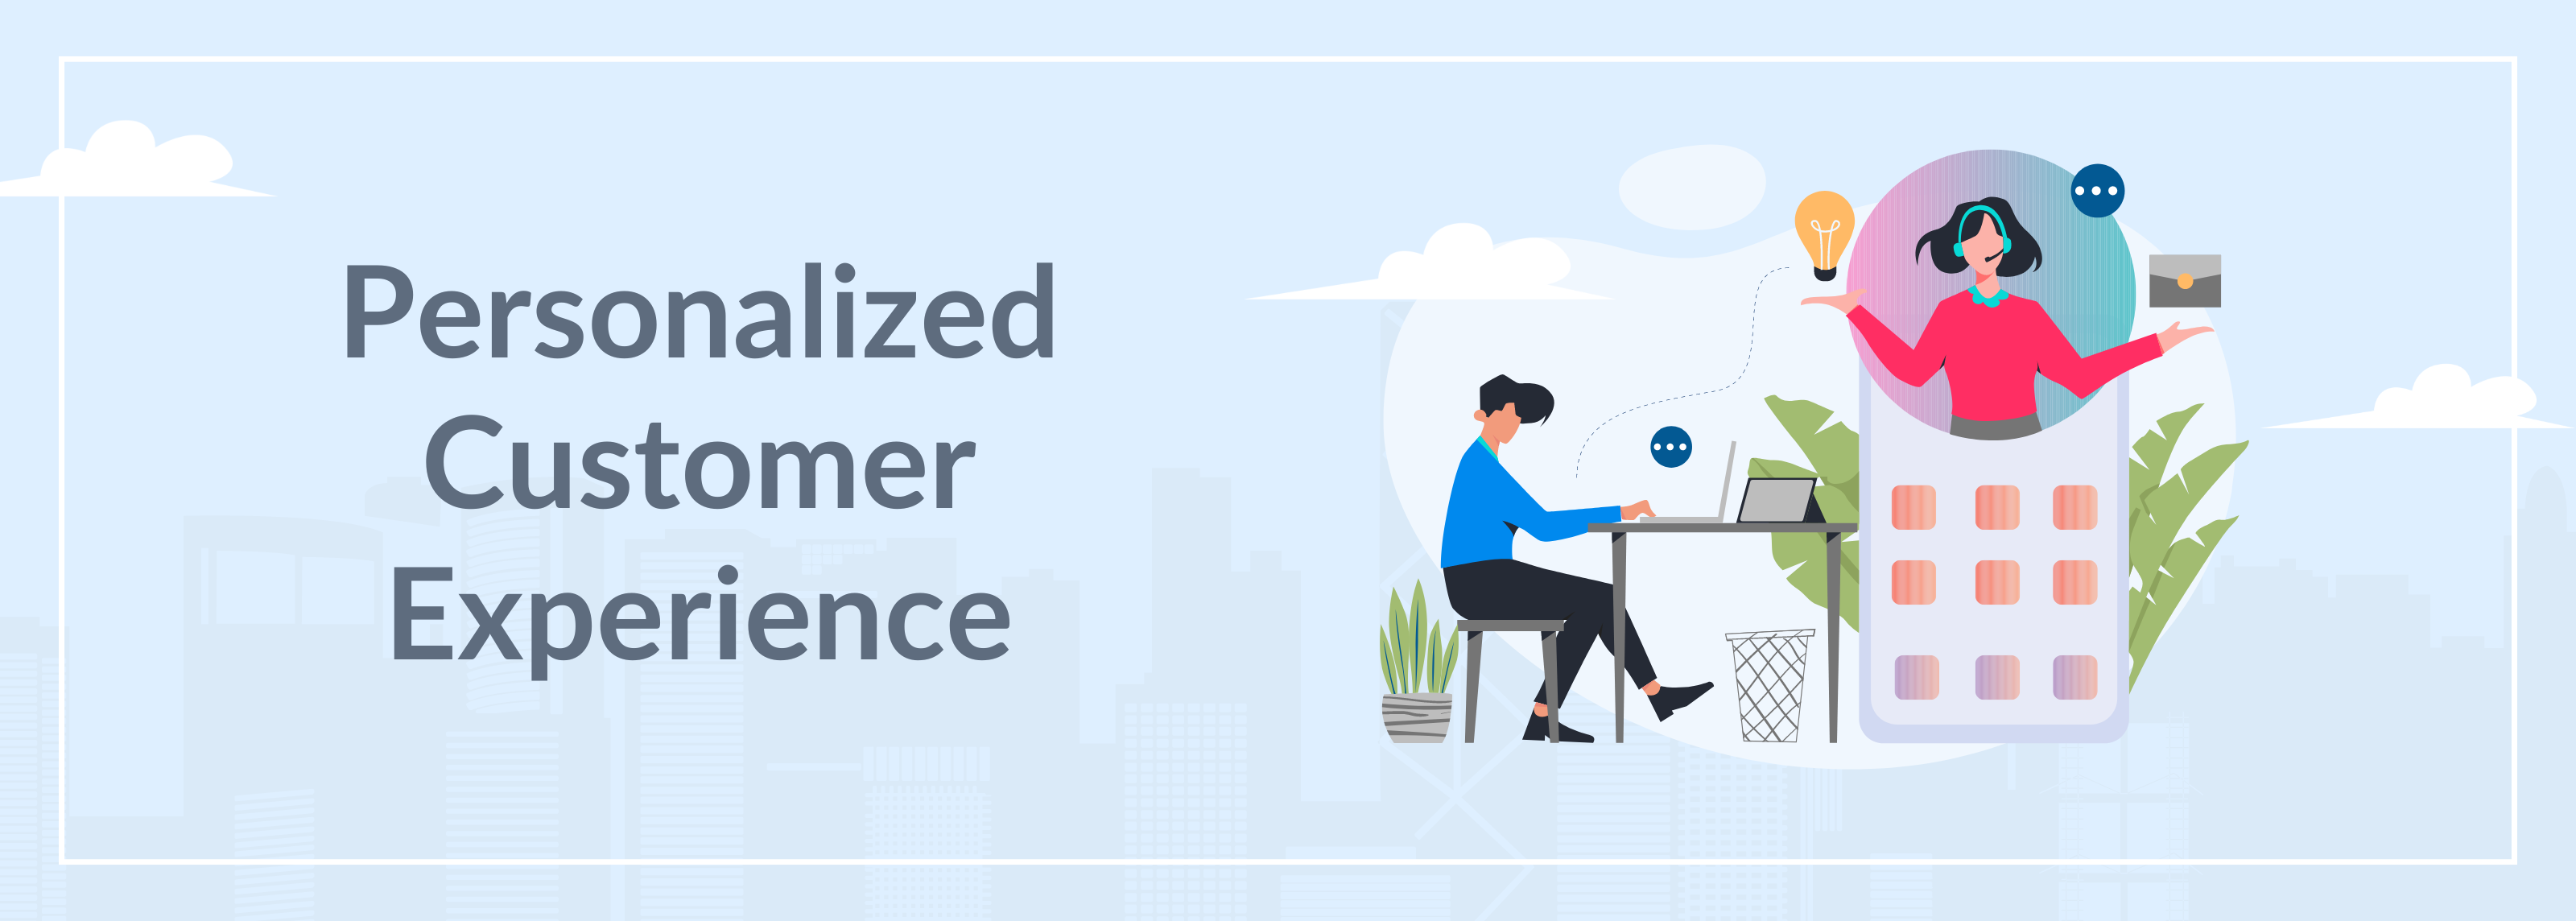 Personalized Customer Experience in Contact Center